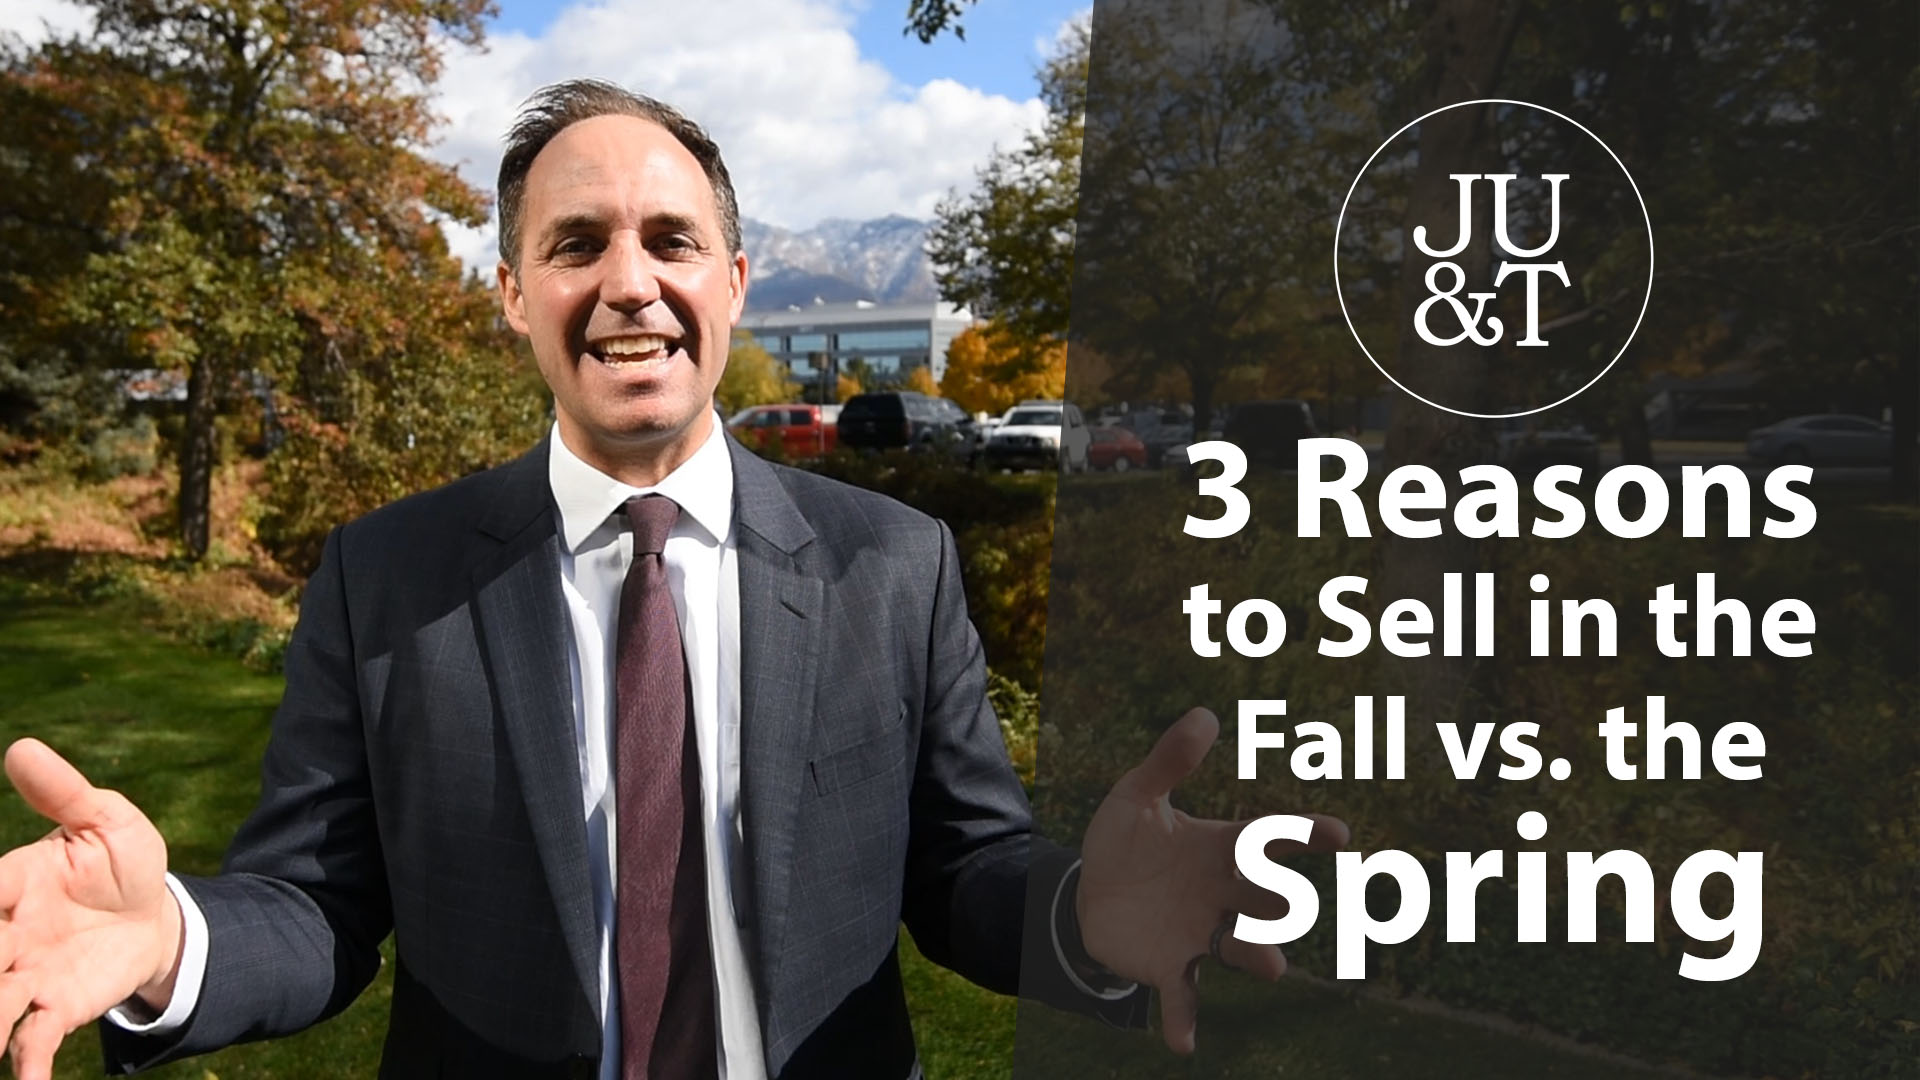 3 Reasons to Sell in the Fall